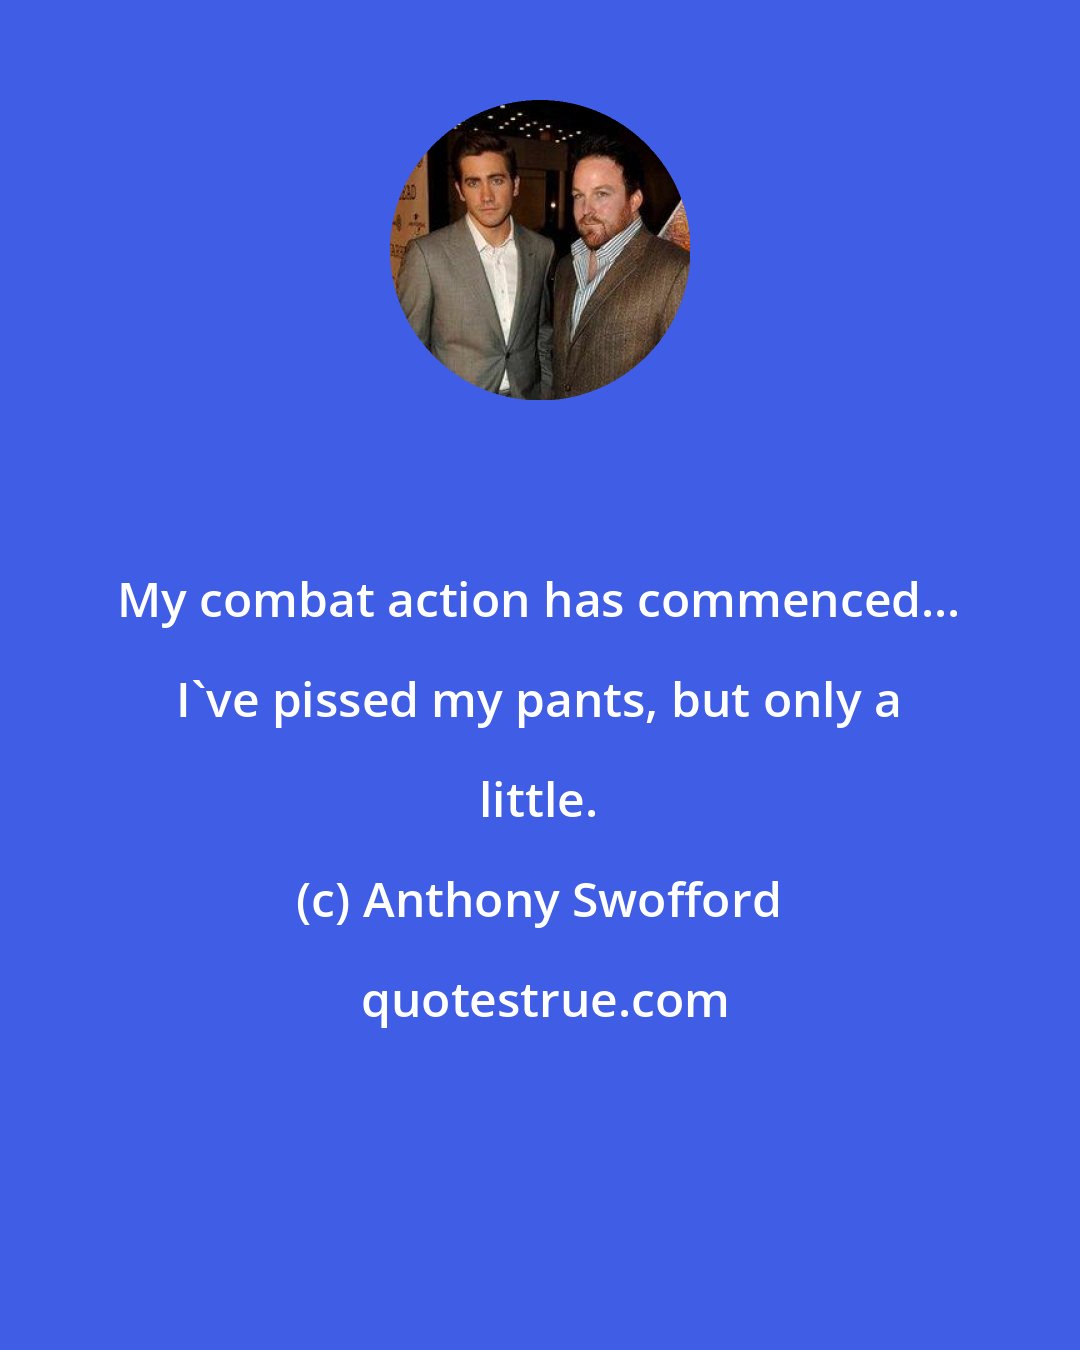 Anthony Swofford: My combat action has commenced... I've pissed my pants, but only a little.